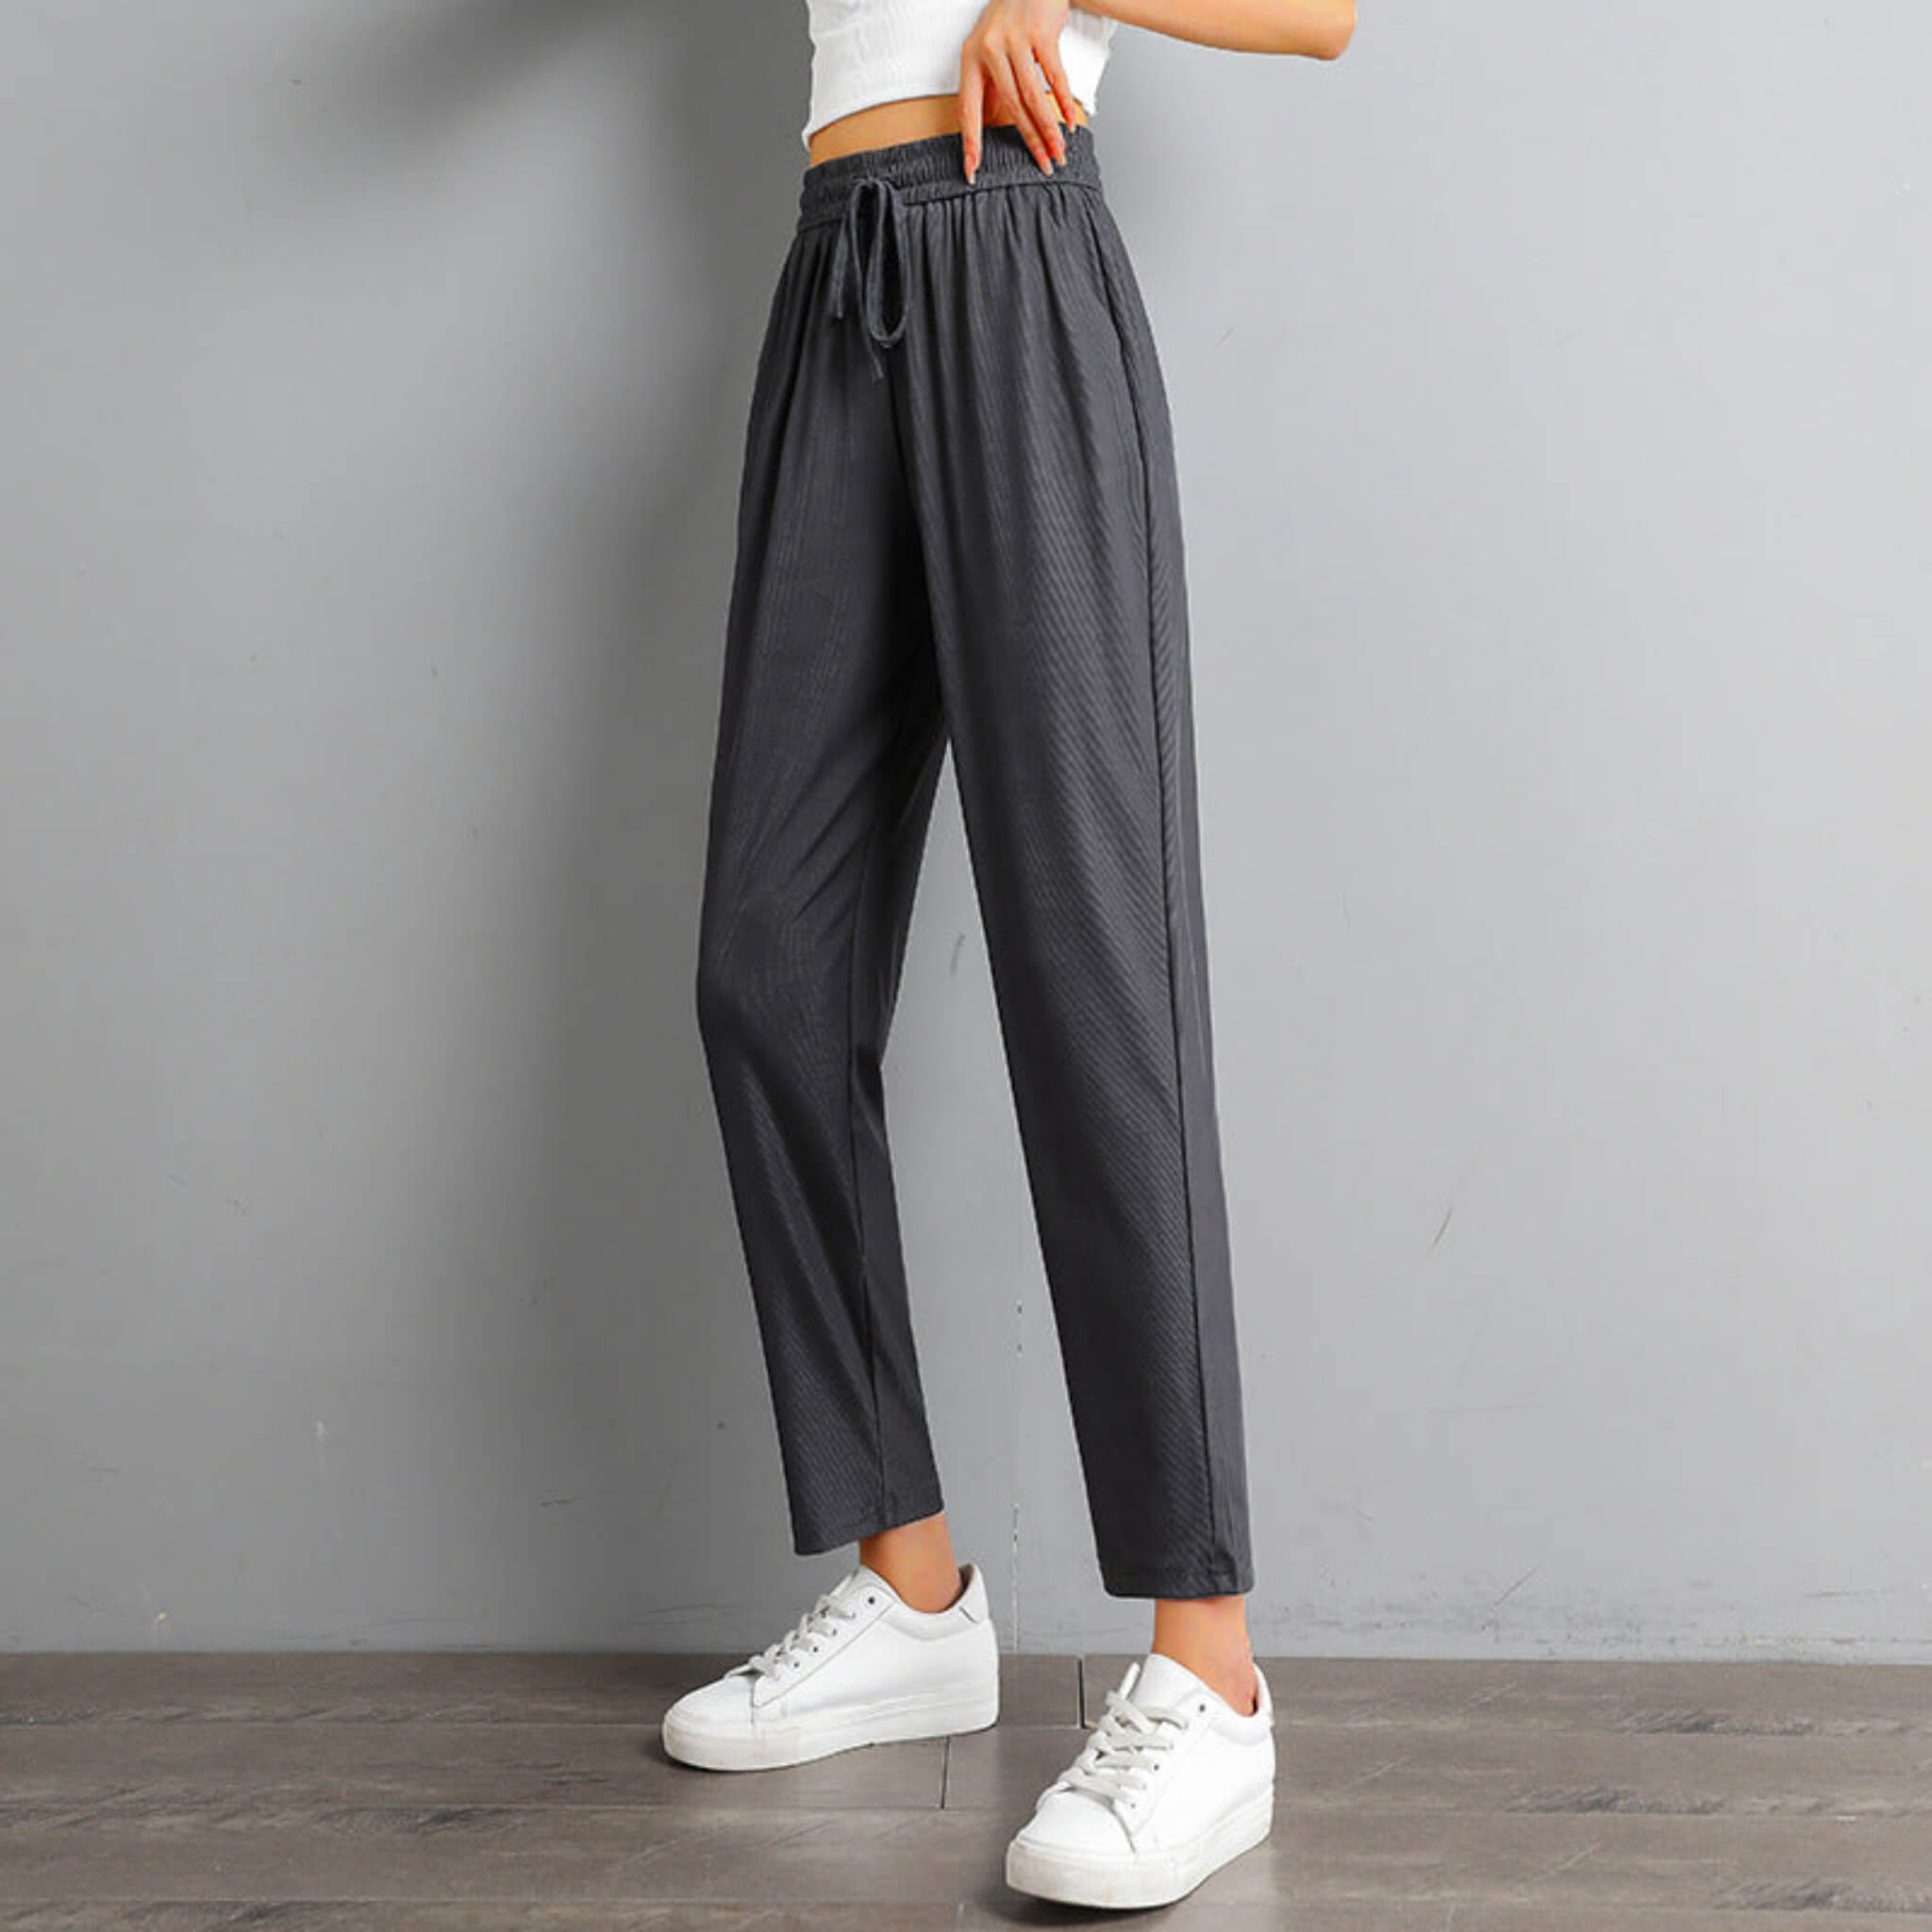 Women's High-waisted Relaxed fit Trousers  UponBasics Grey S 